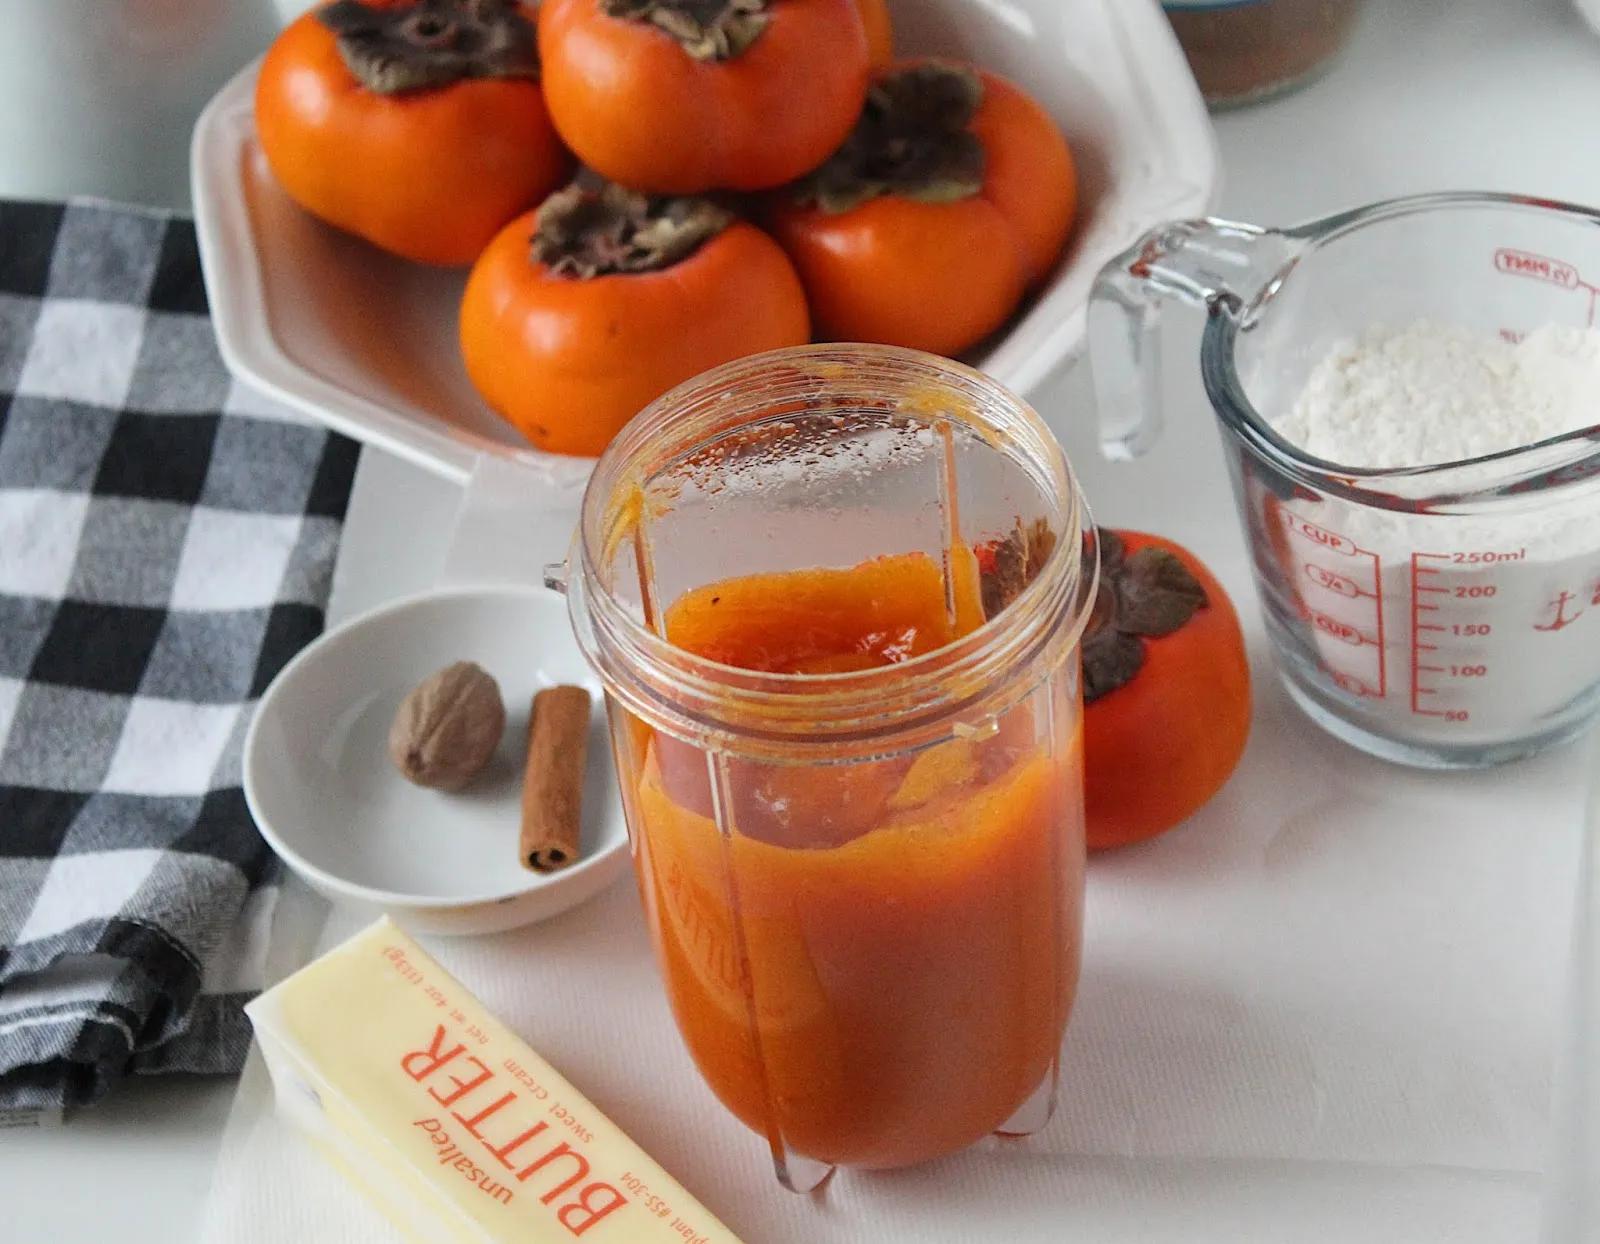 Easy Persimmon Pudding